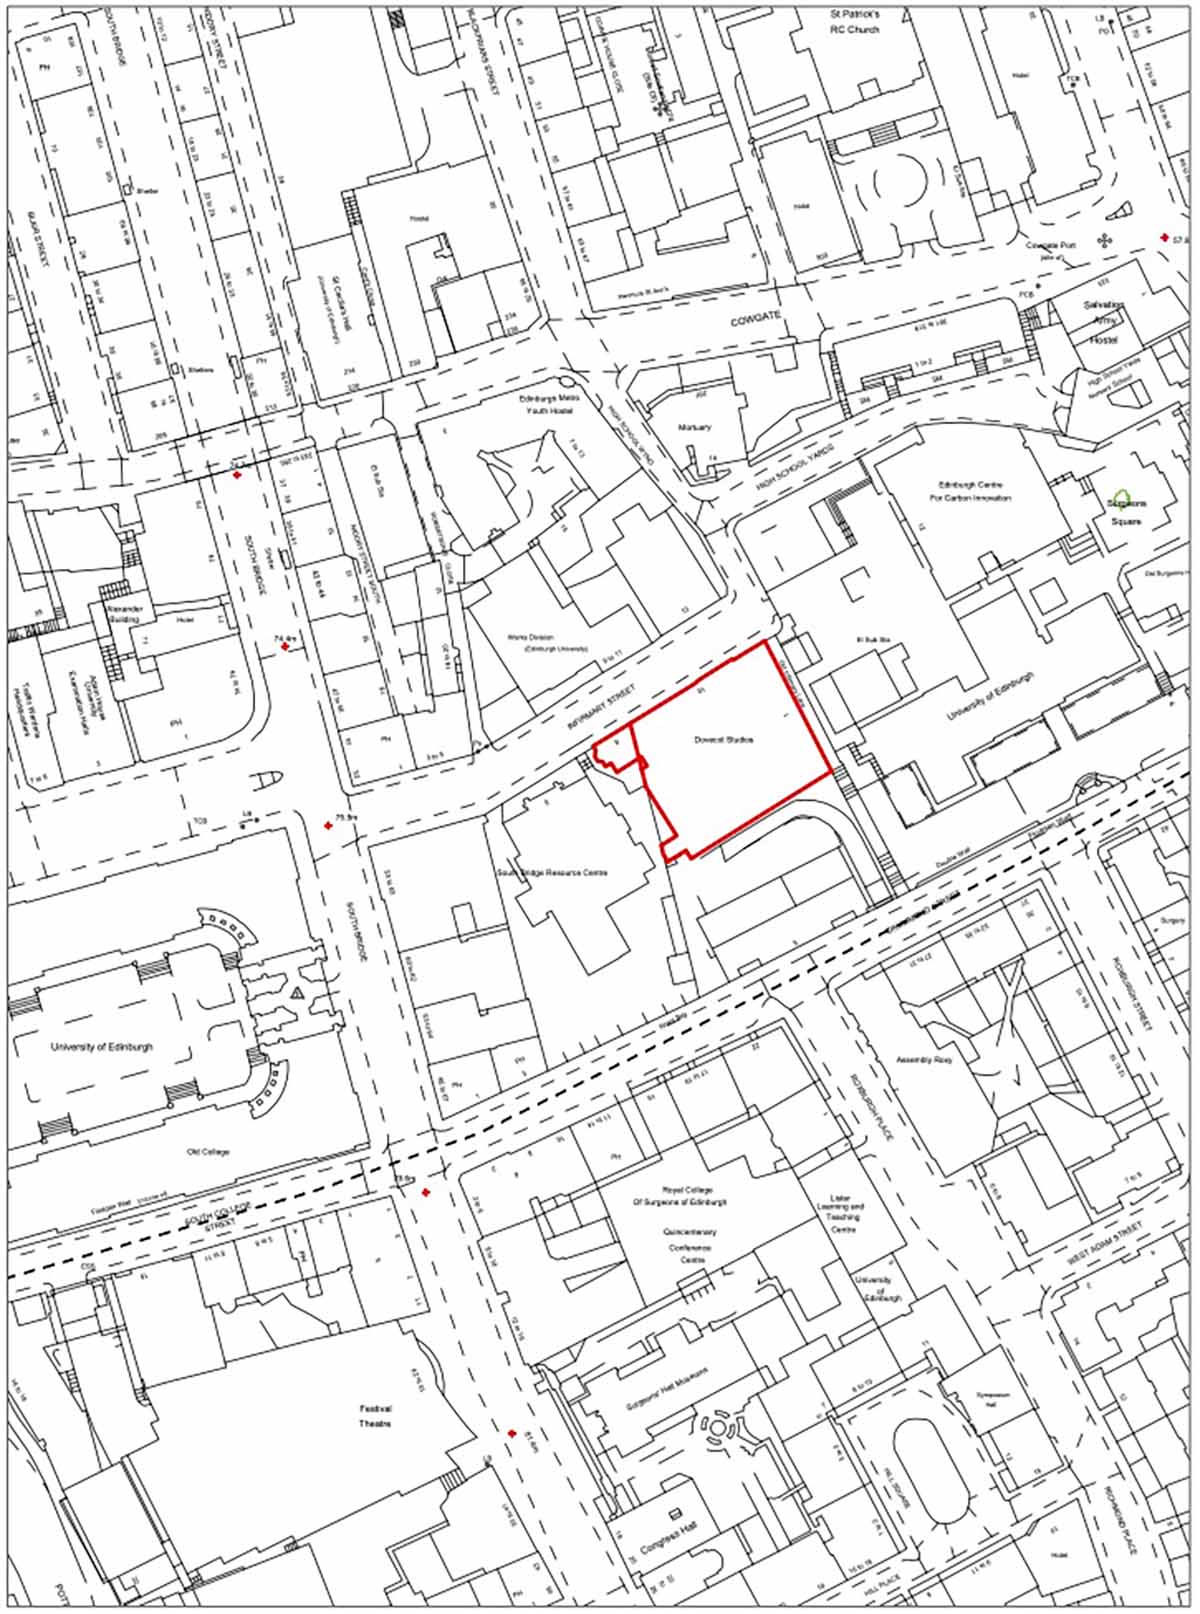 Location Plan of the Edinburgh City area with project site outlined in red